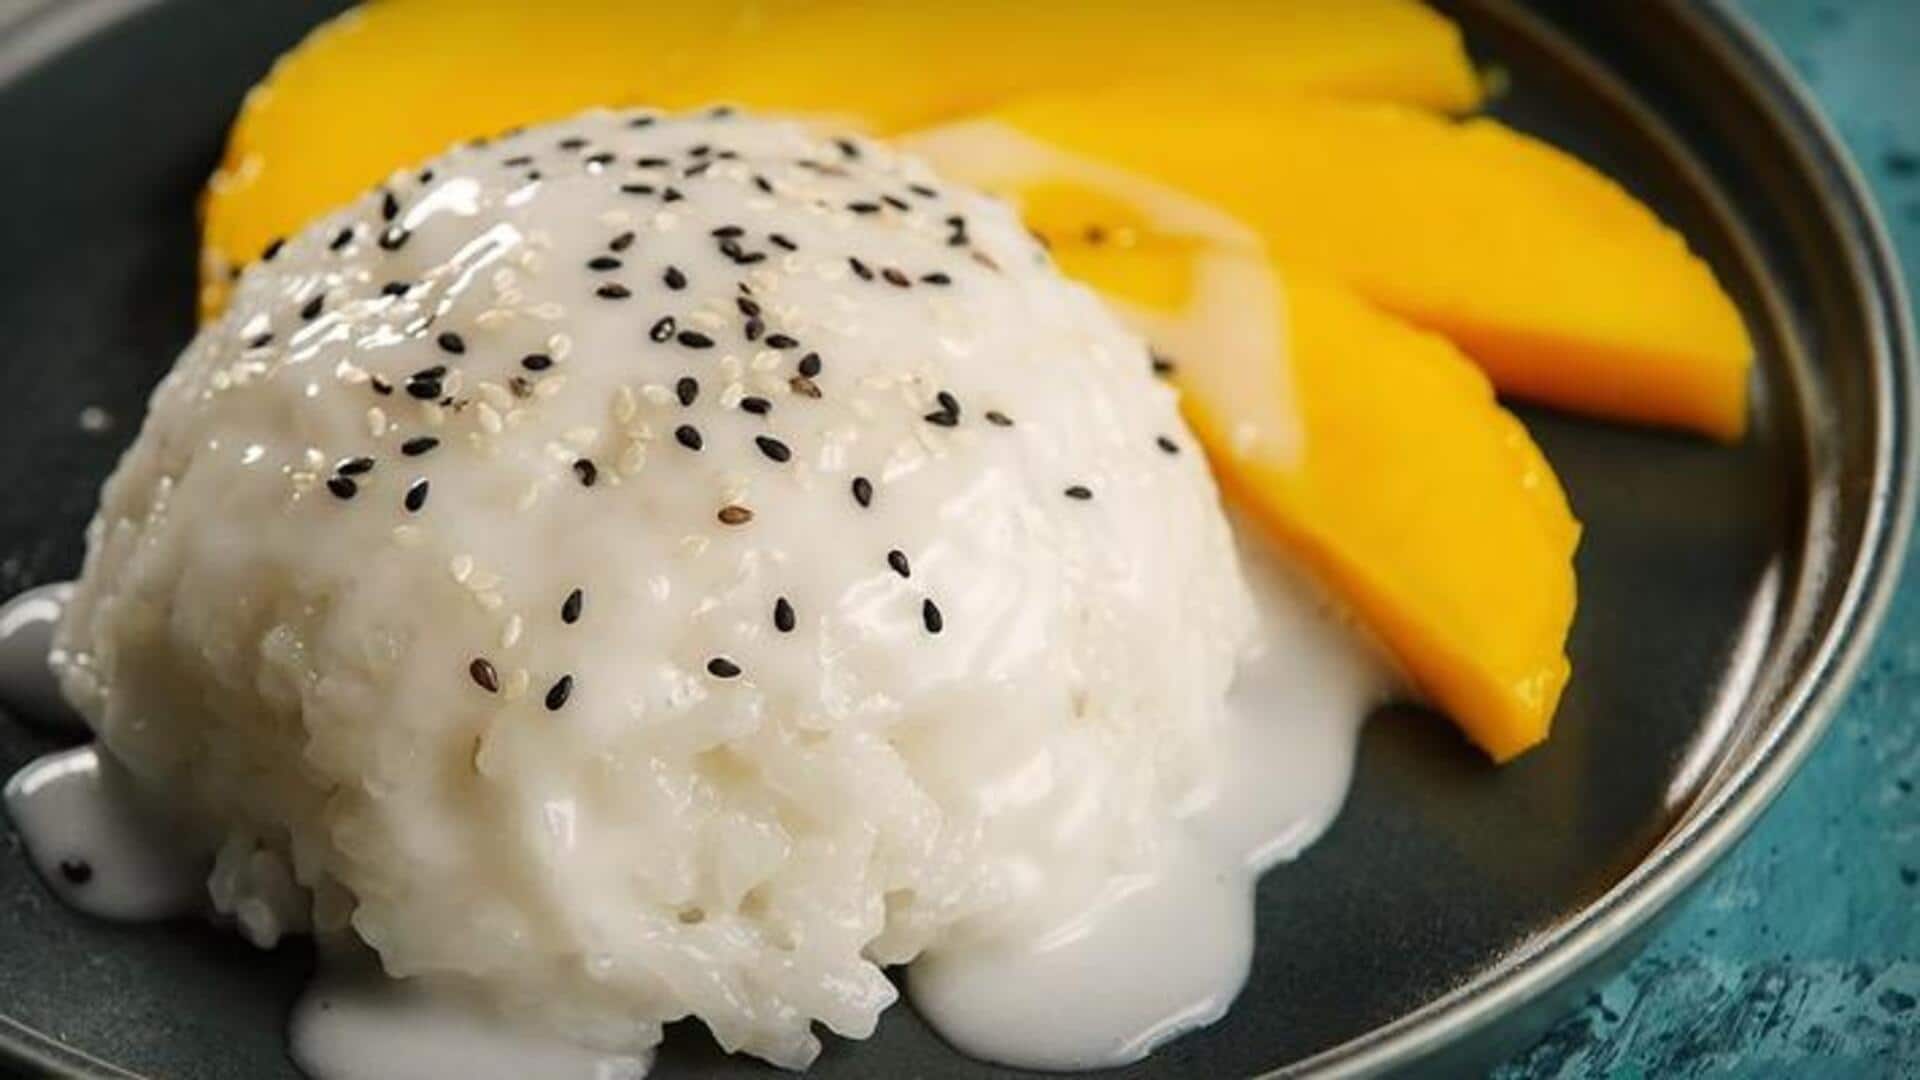 Recipe: Cook this tempting Thai mango sticky rice at home